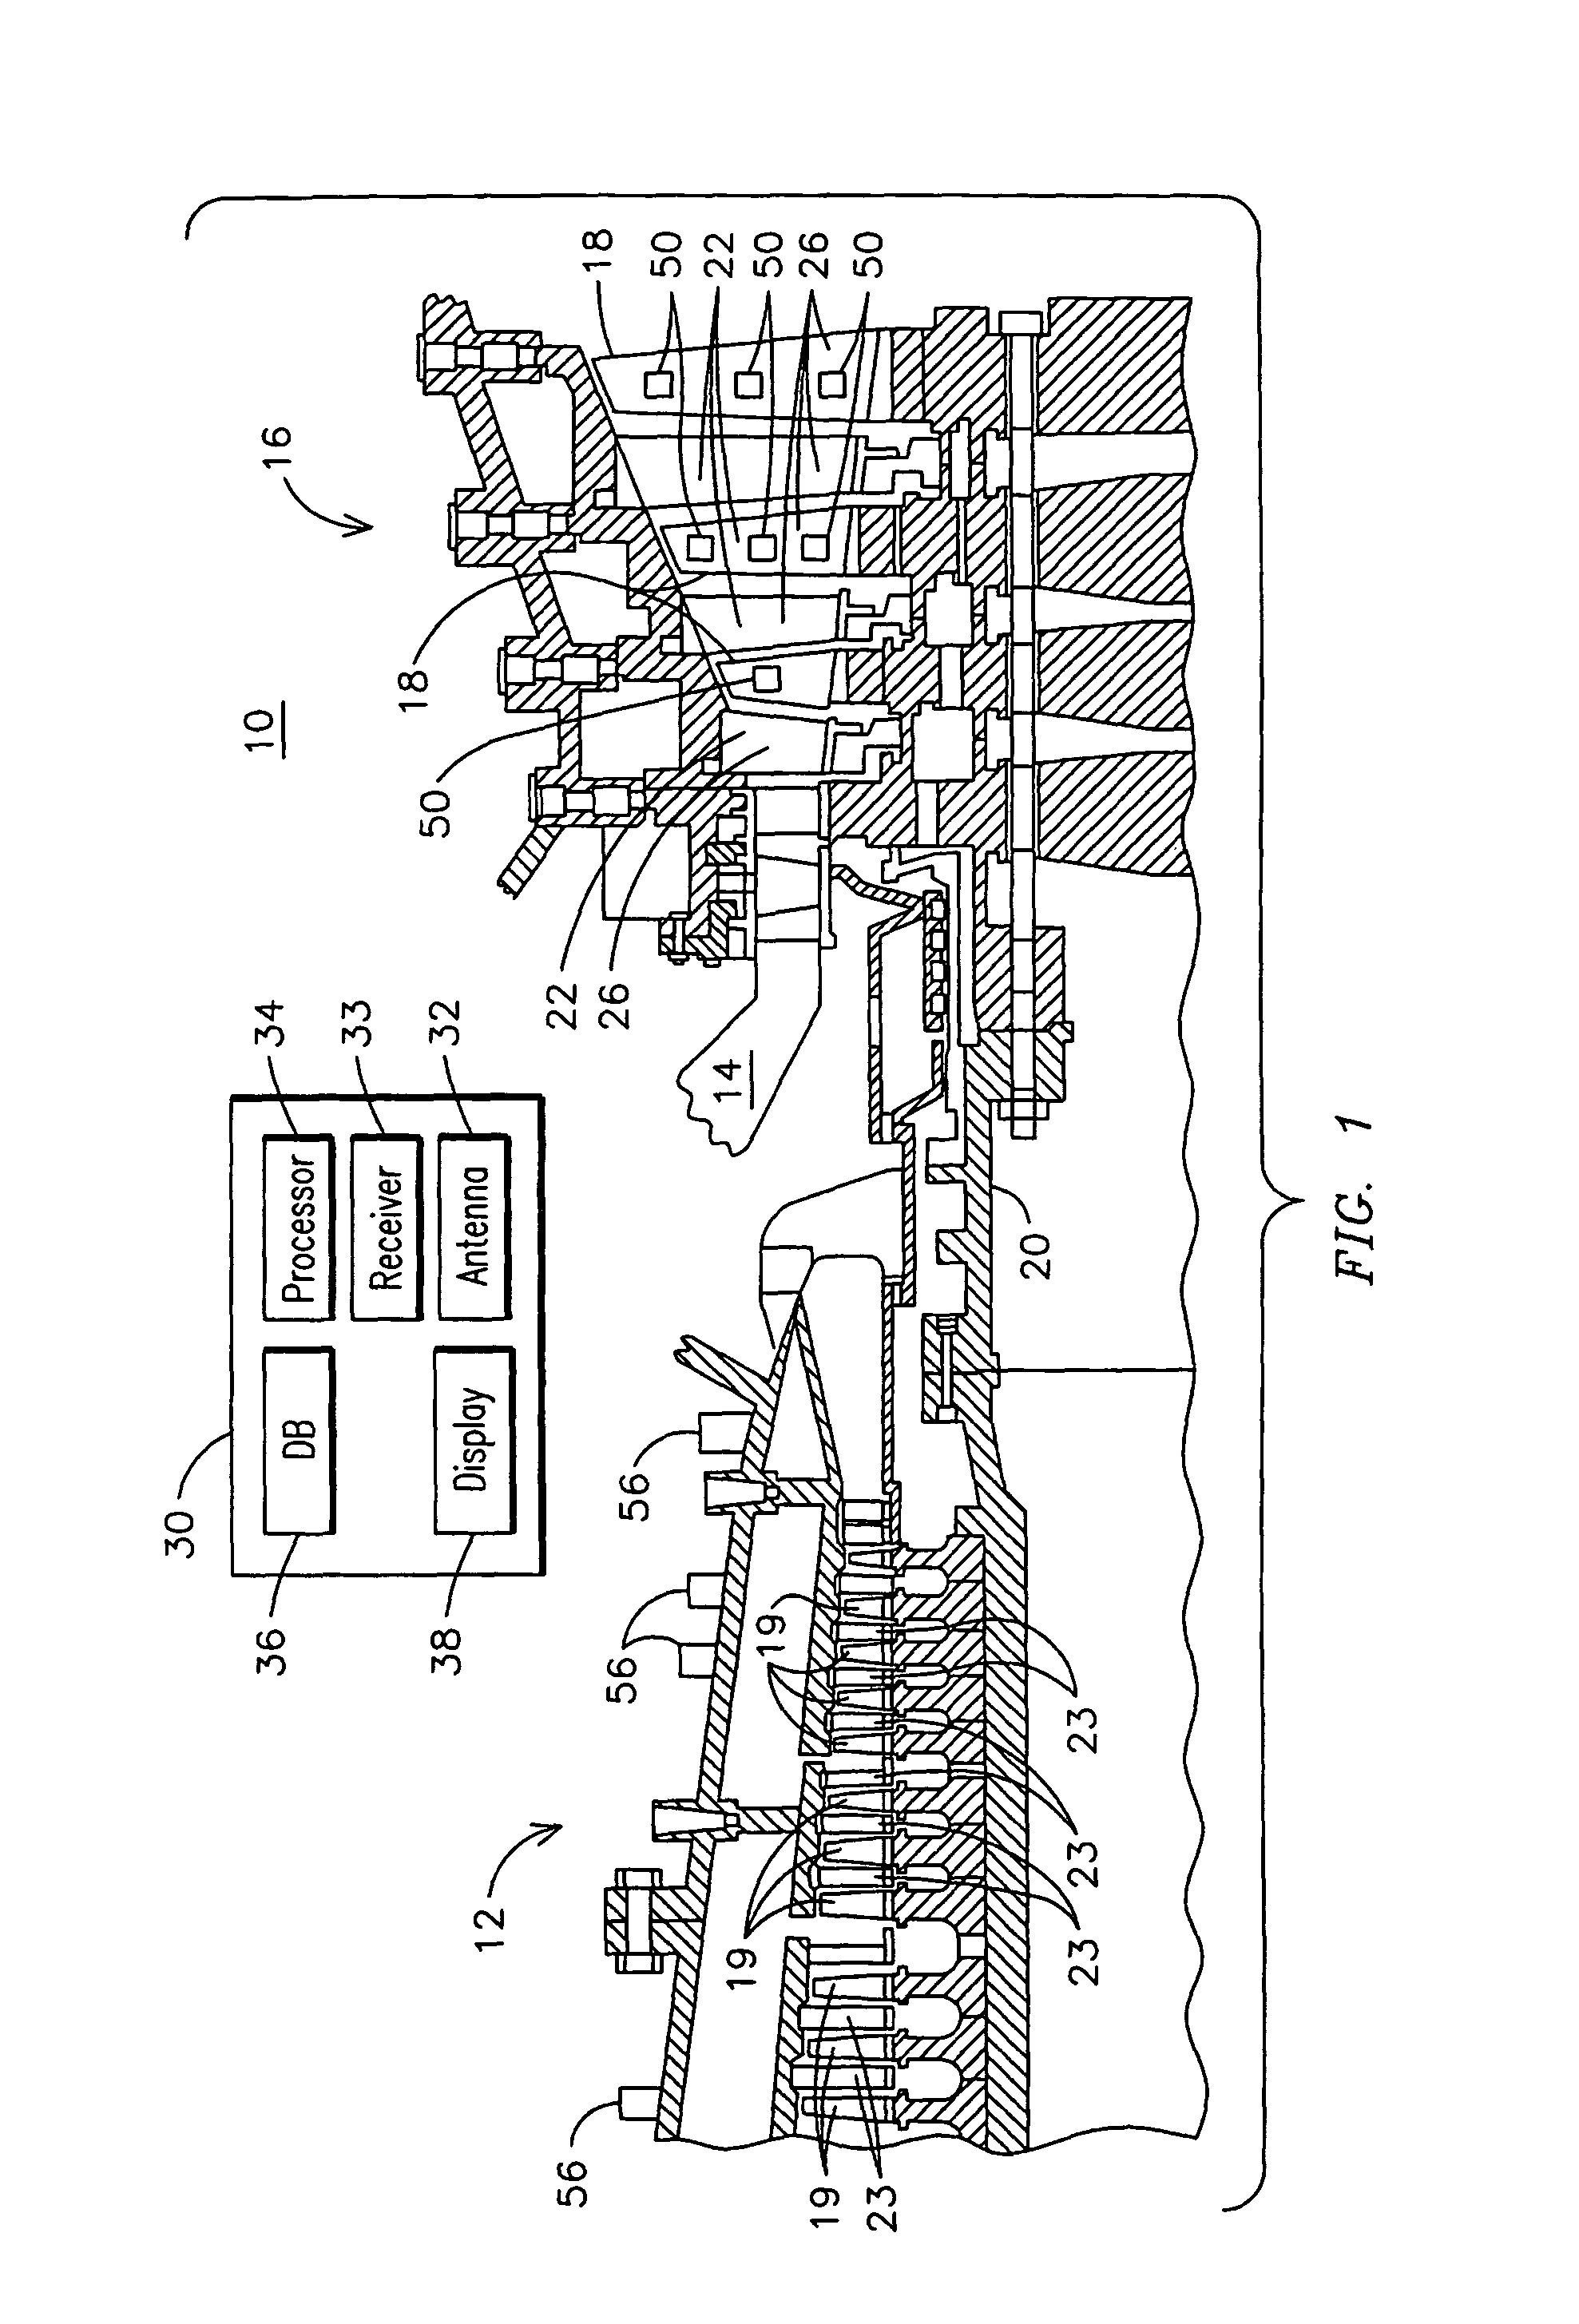 Instrumented component for use in an operating environment